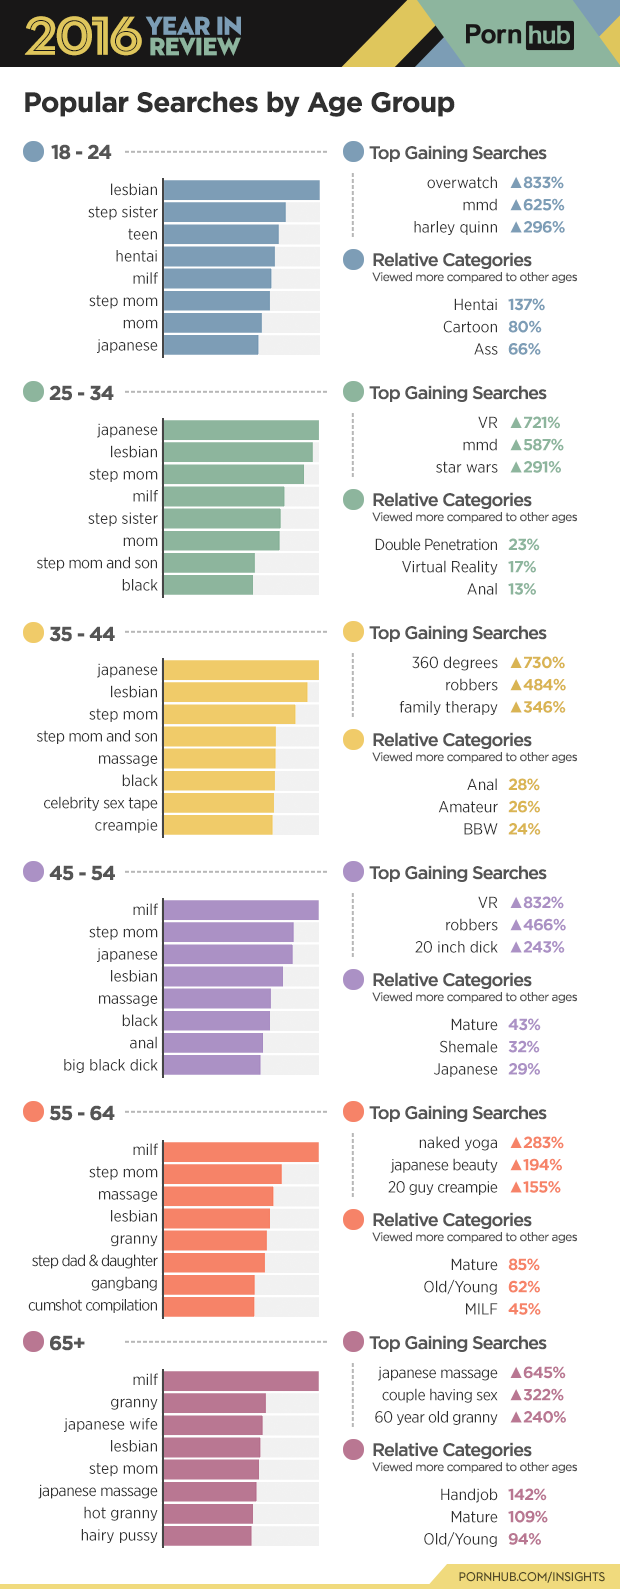 3-pornhub-insights-2016-year-review-age-searches